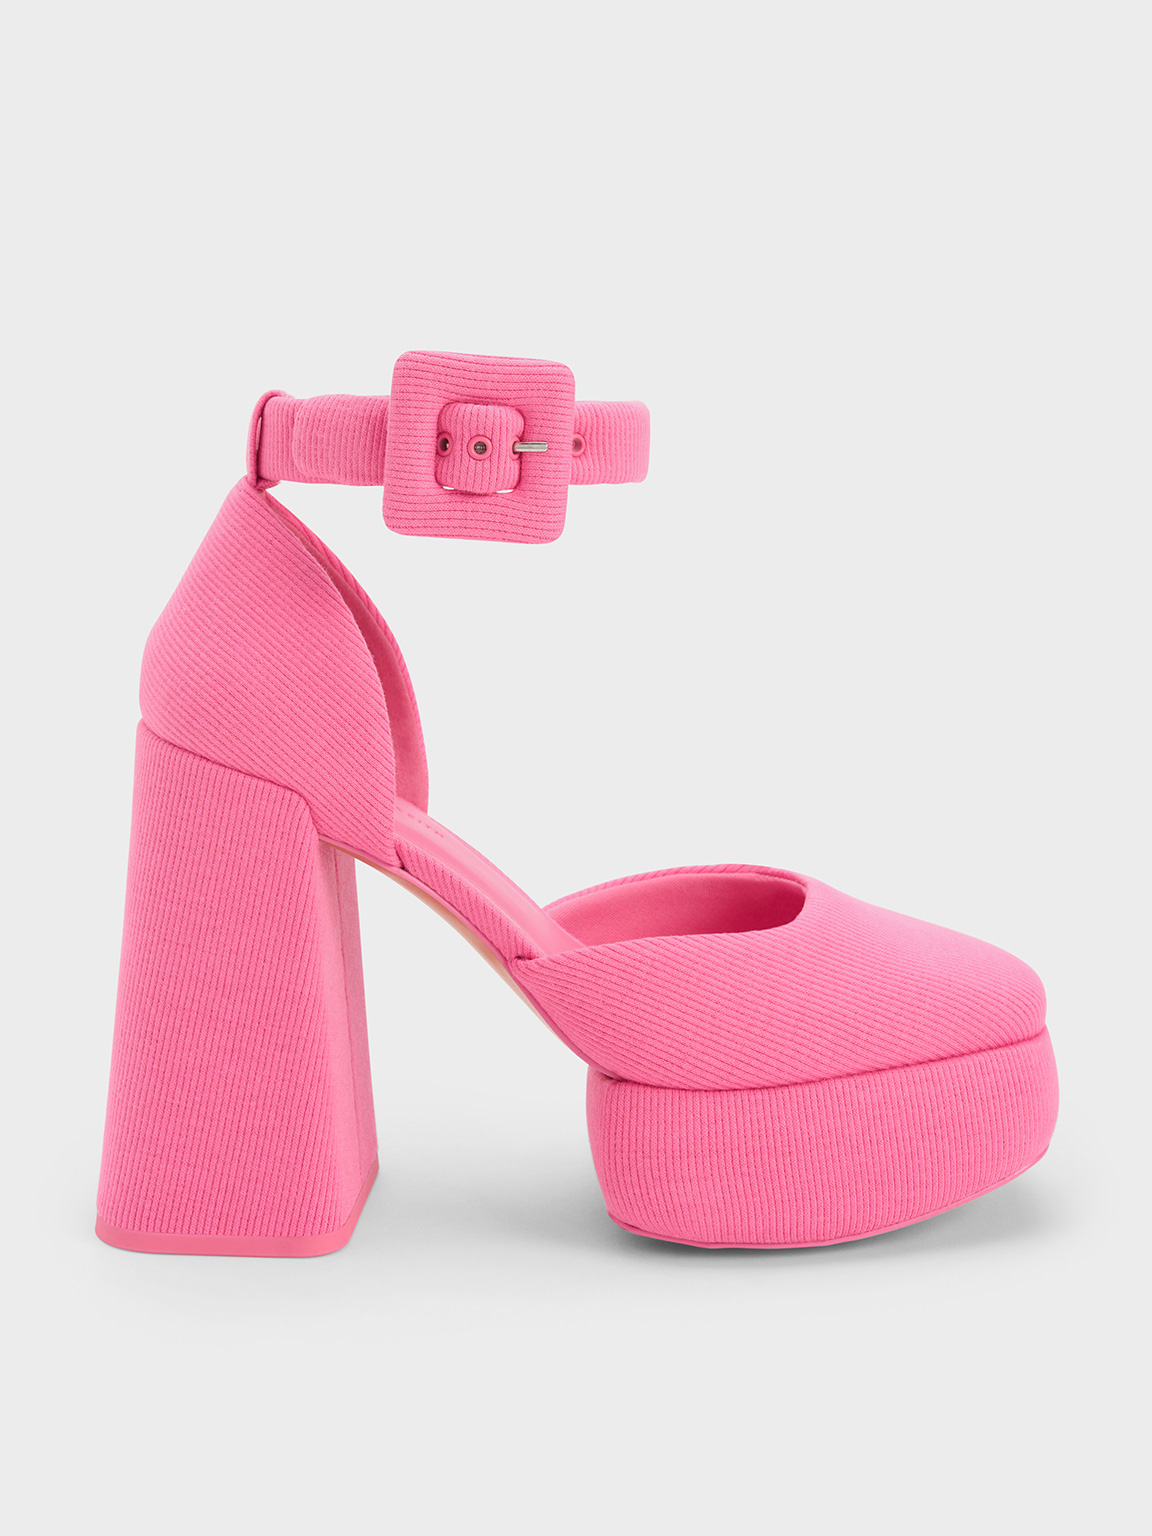 Charles & Keith Sinead Woven Buckled D'orsay Platform Pumps In Pink